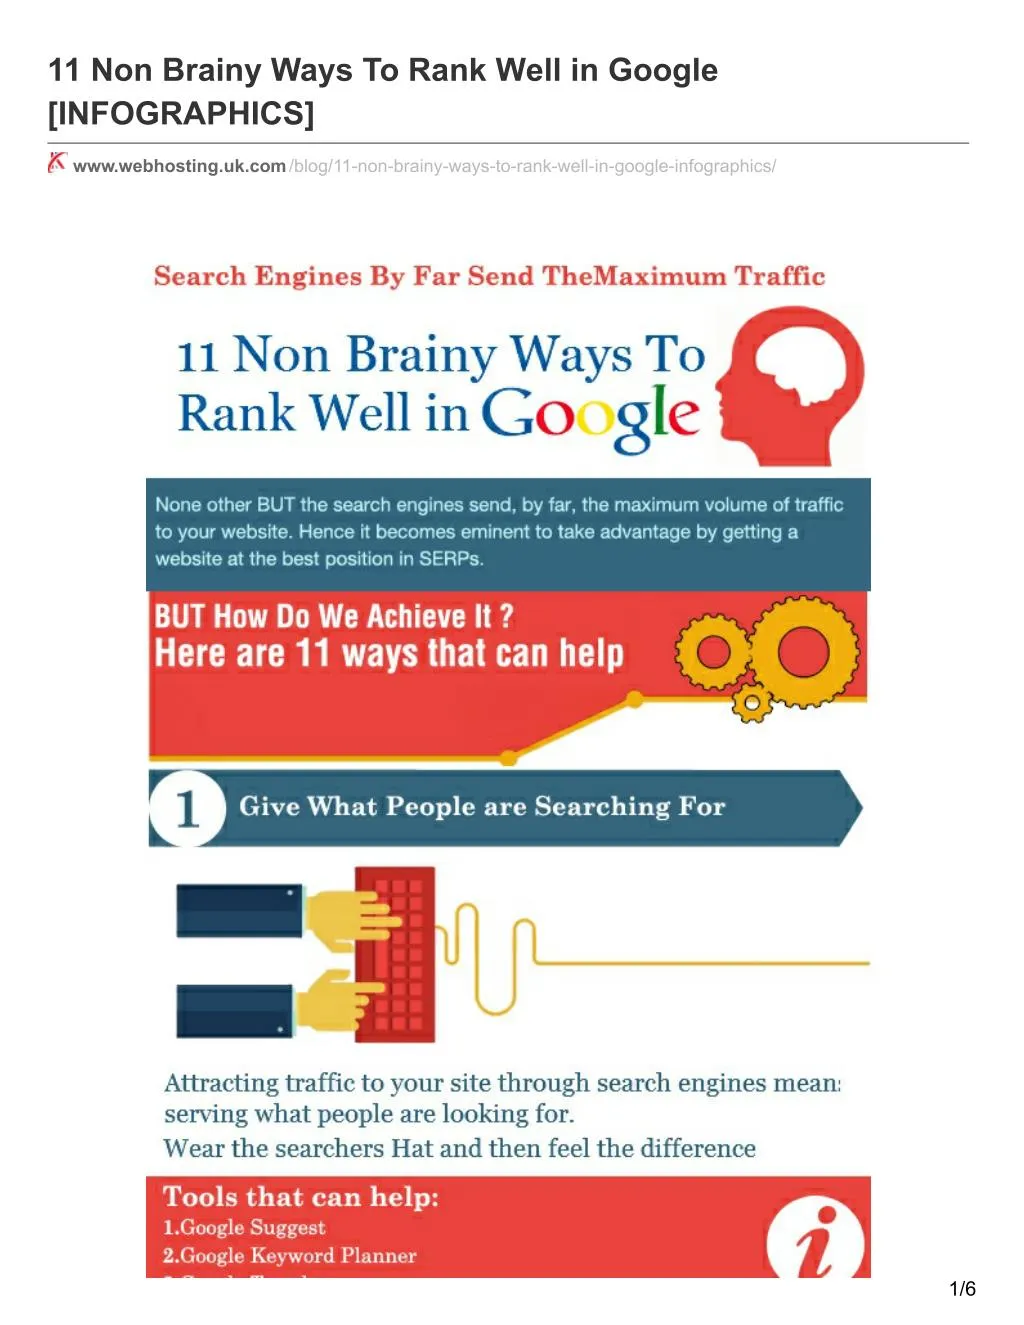 11 non brainy ways to rank well in google